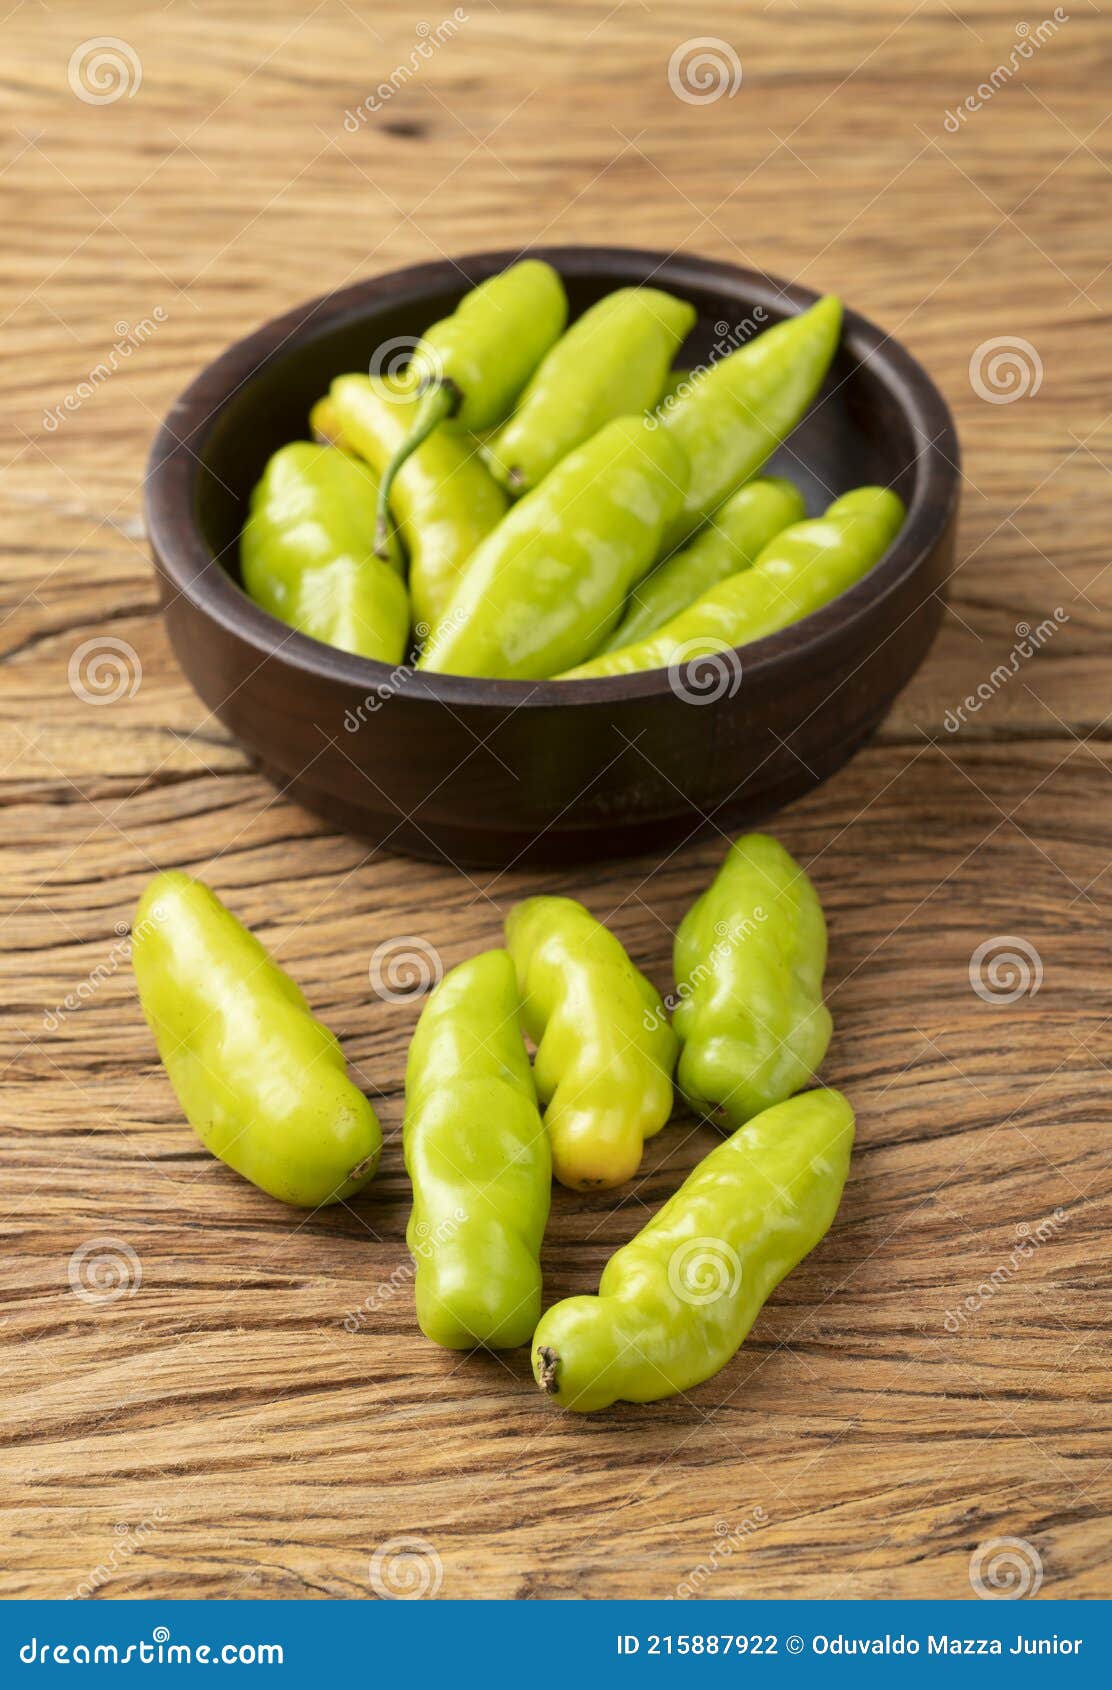 green cheiro scent/smell pepper on a bowl over wooden table